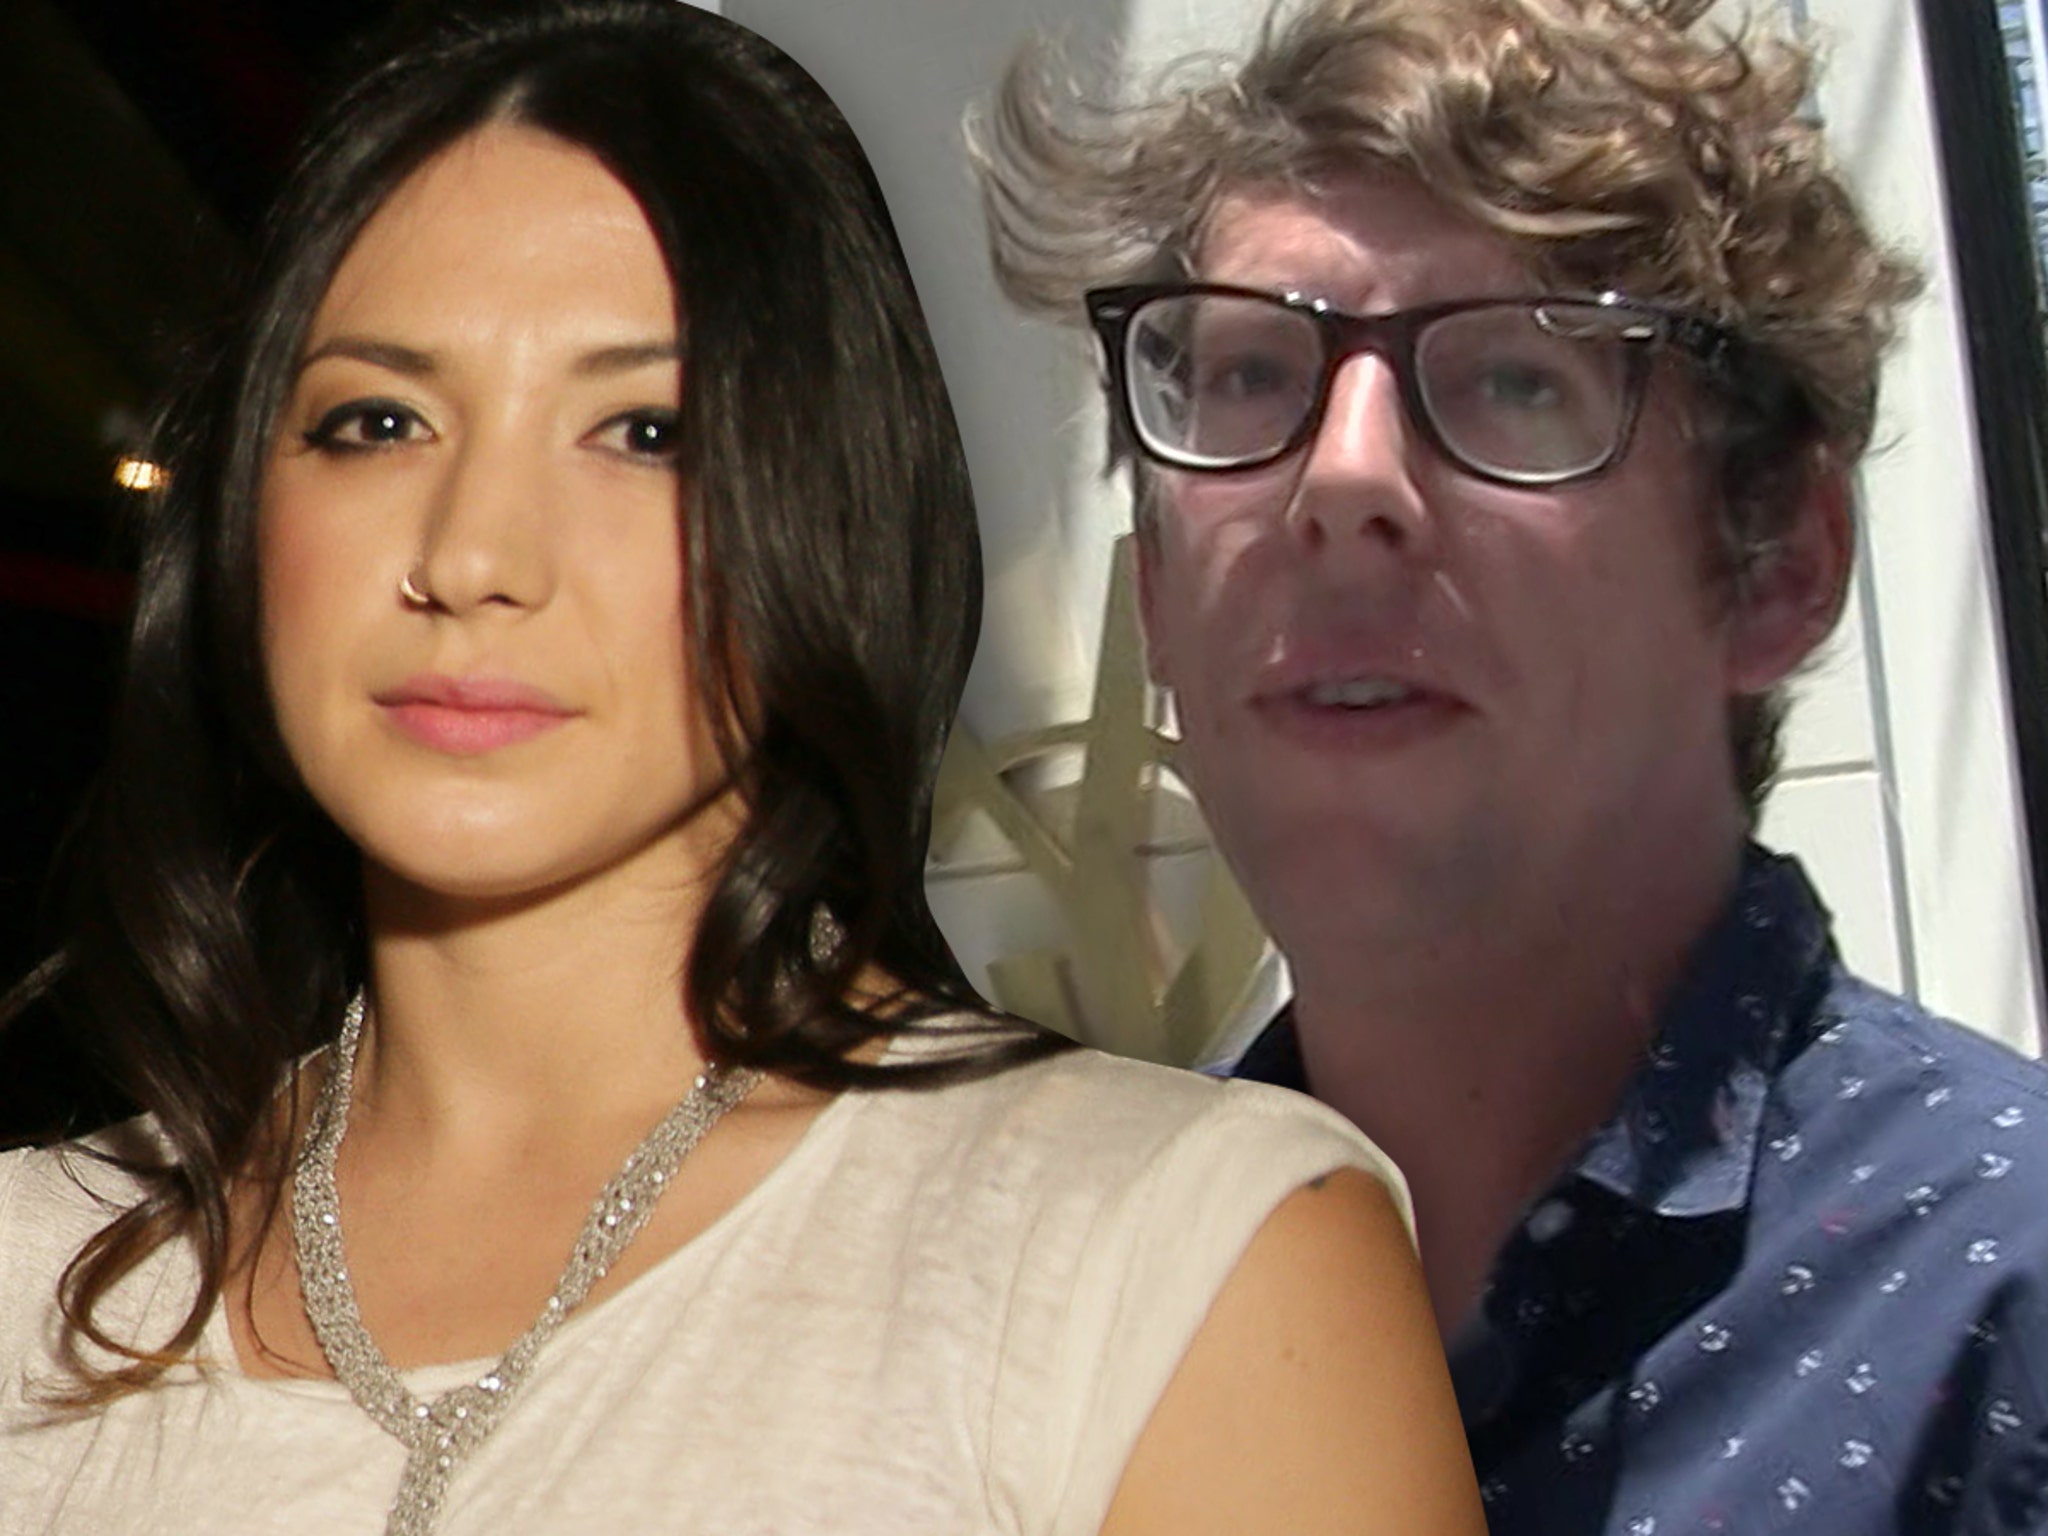 Michelle Branch separates from Patrick Carney